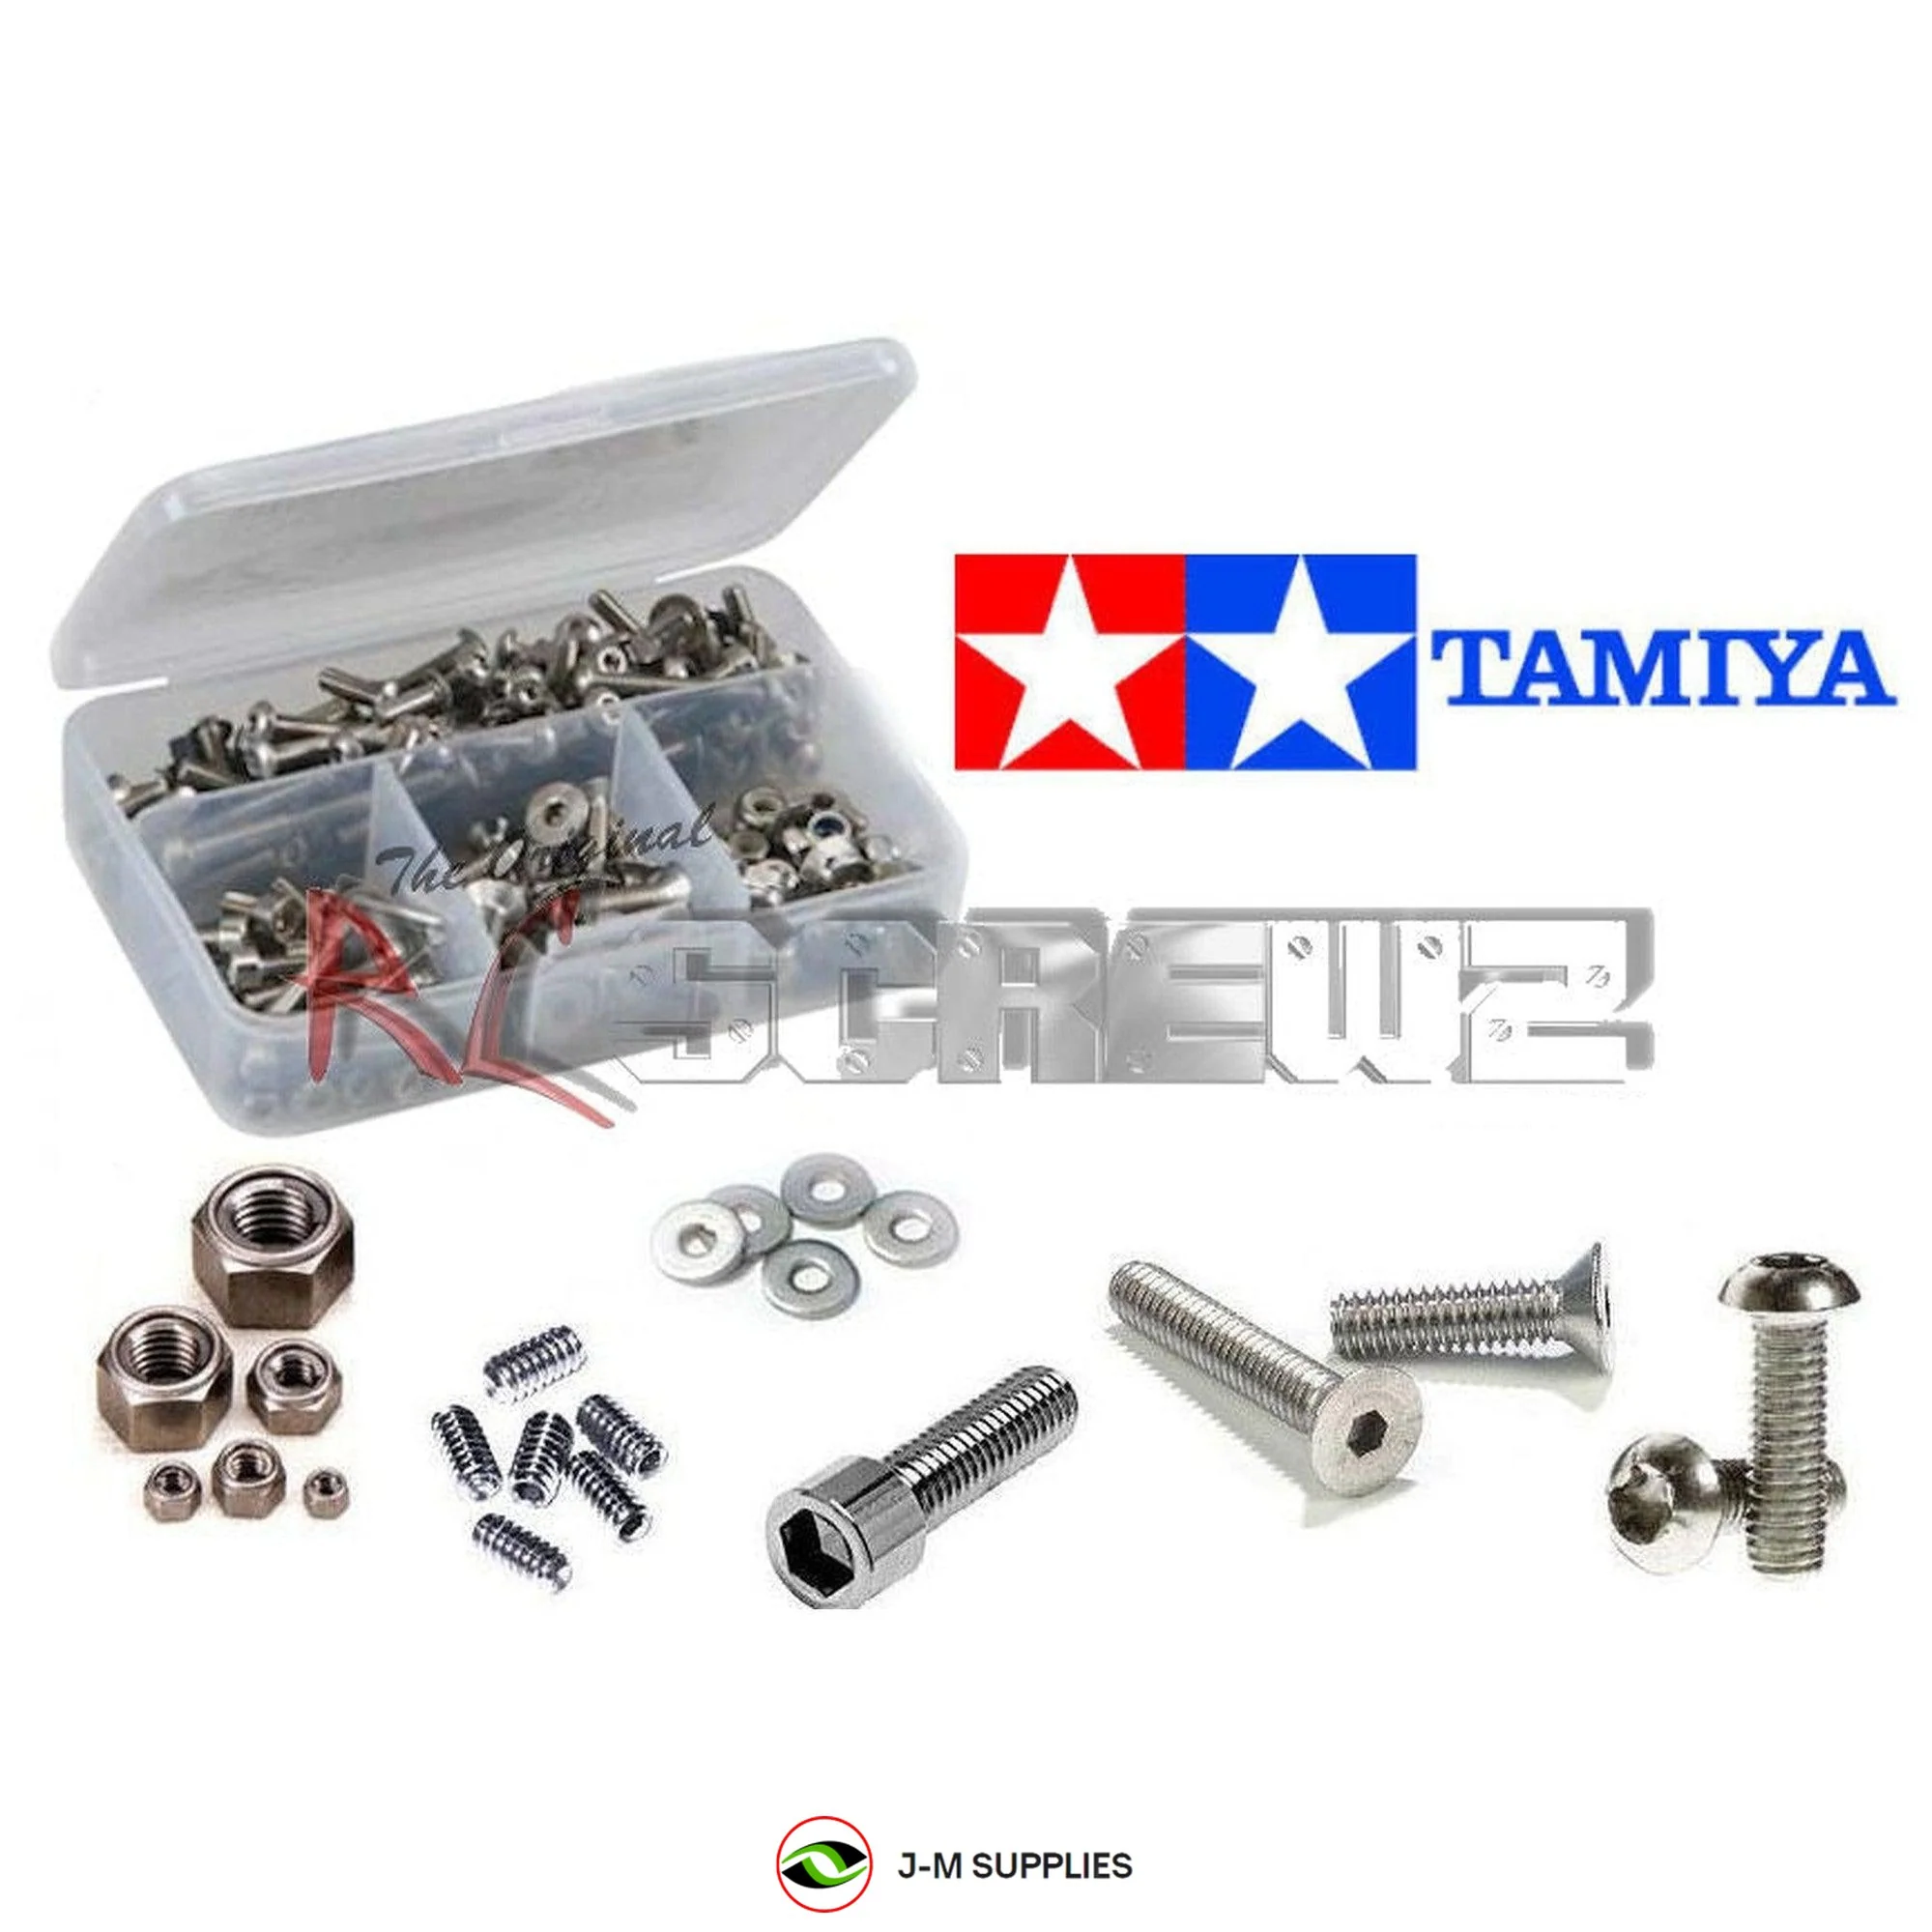 RCScrewZ Stainless Steel Screw Kit tam051 for Tamiya Evolution 4/MS Series - Picture 1 of 12